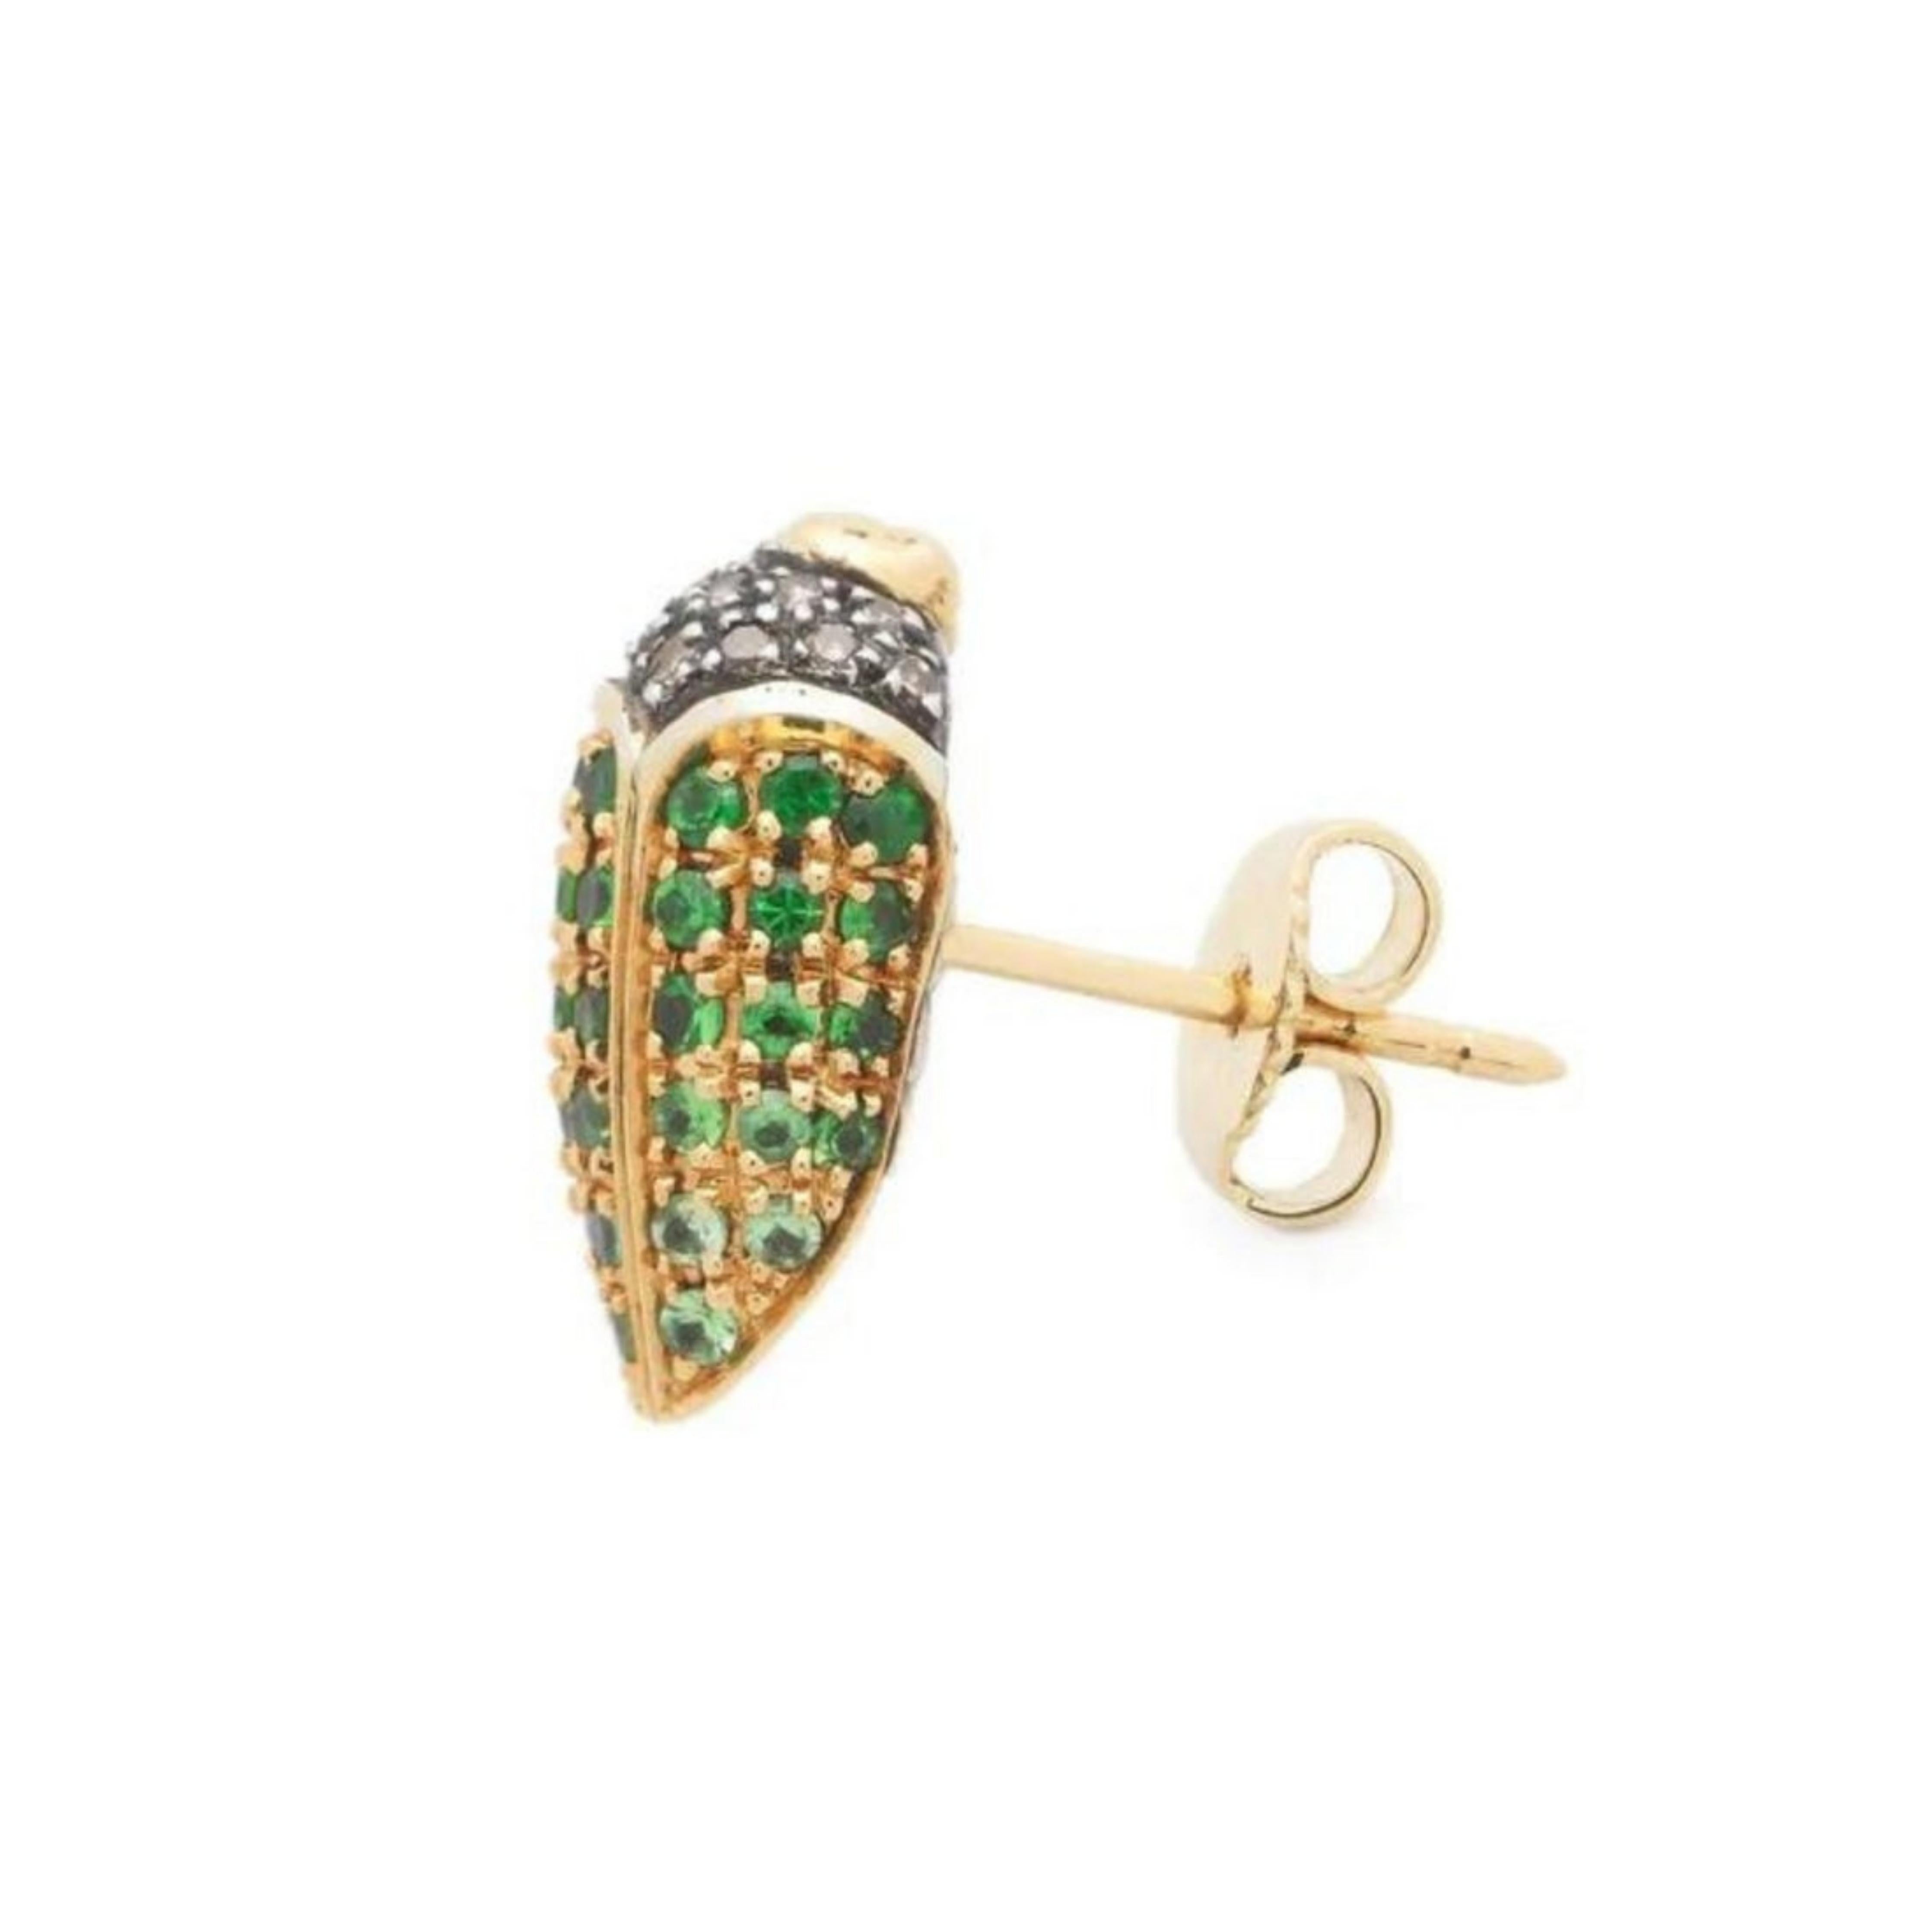 Bibi van der Velden, Mini Scarab Pave Stud. Crafted from 18K yellow gold and sterling silver, this earring features a pave of brown diamonds, tsavorites and yellow sapphires. Shown from above.